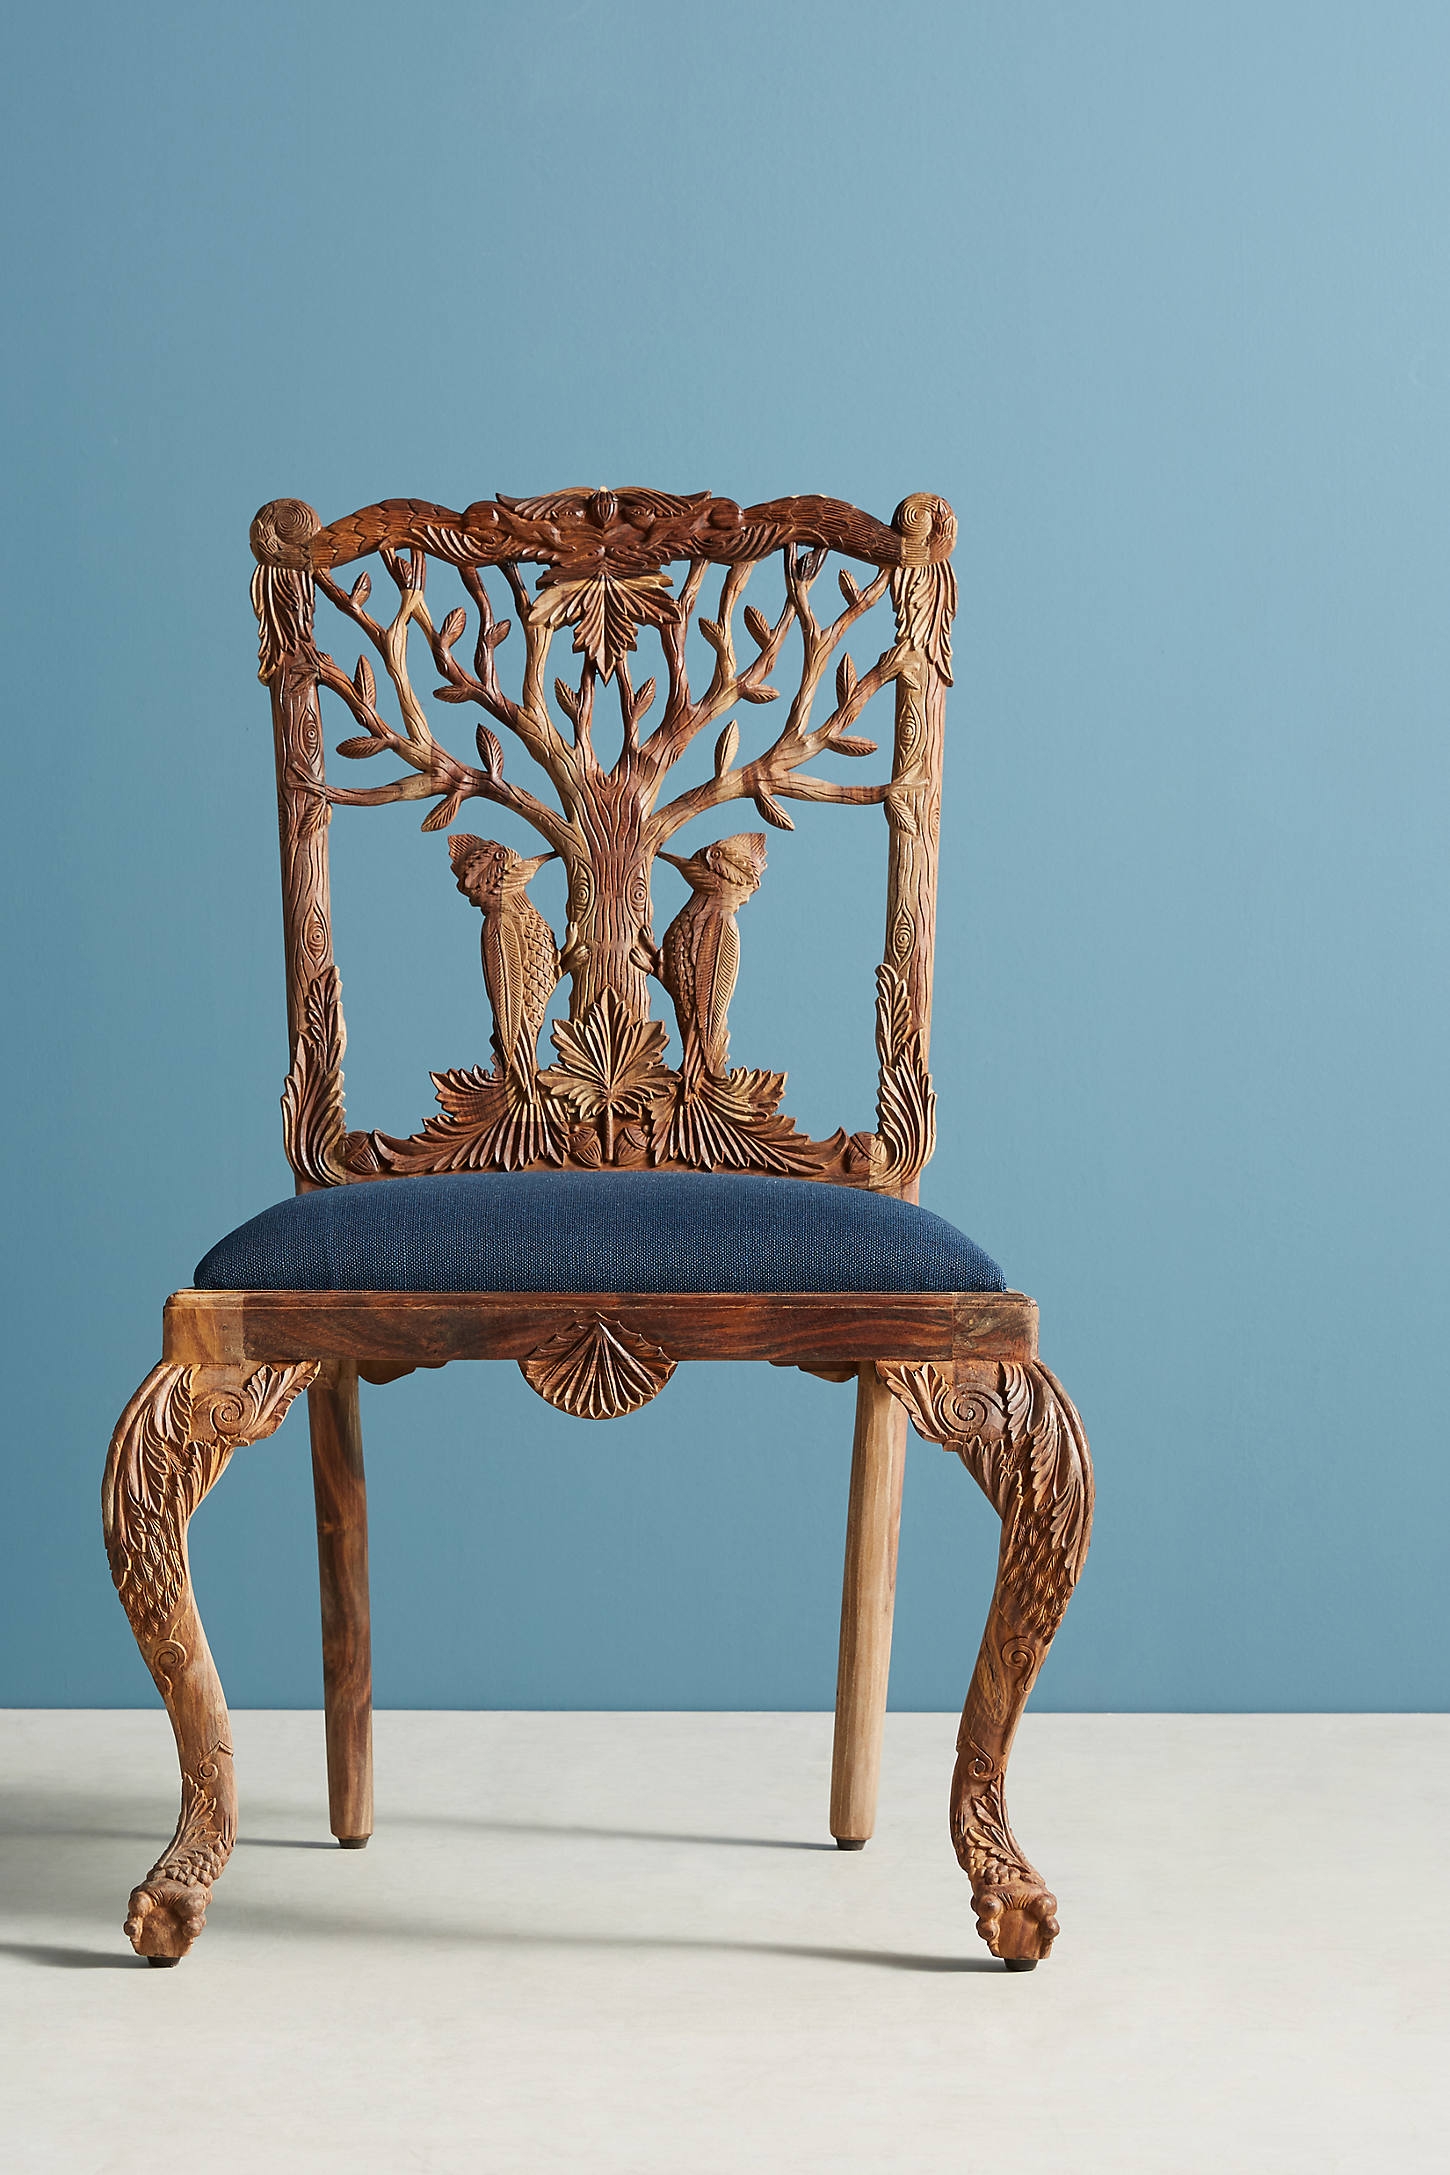 Handcarved Menagerie Woodpecker Dining Chair - Image 0